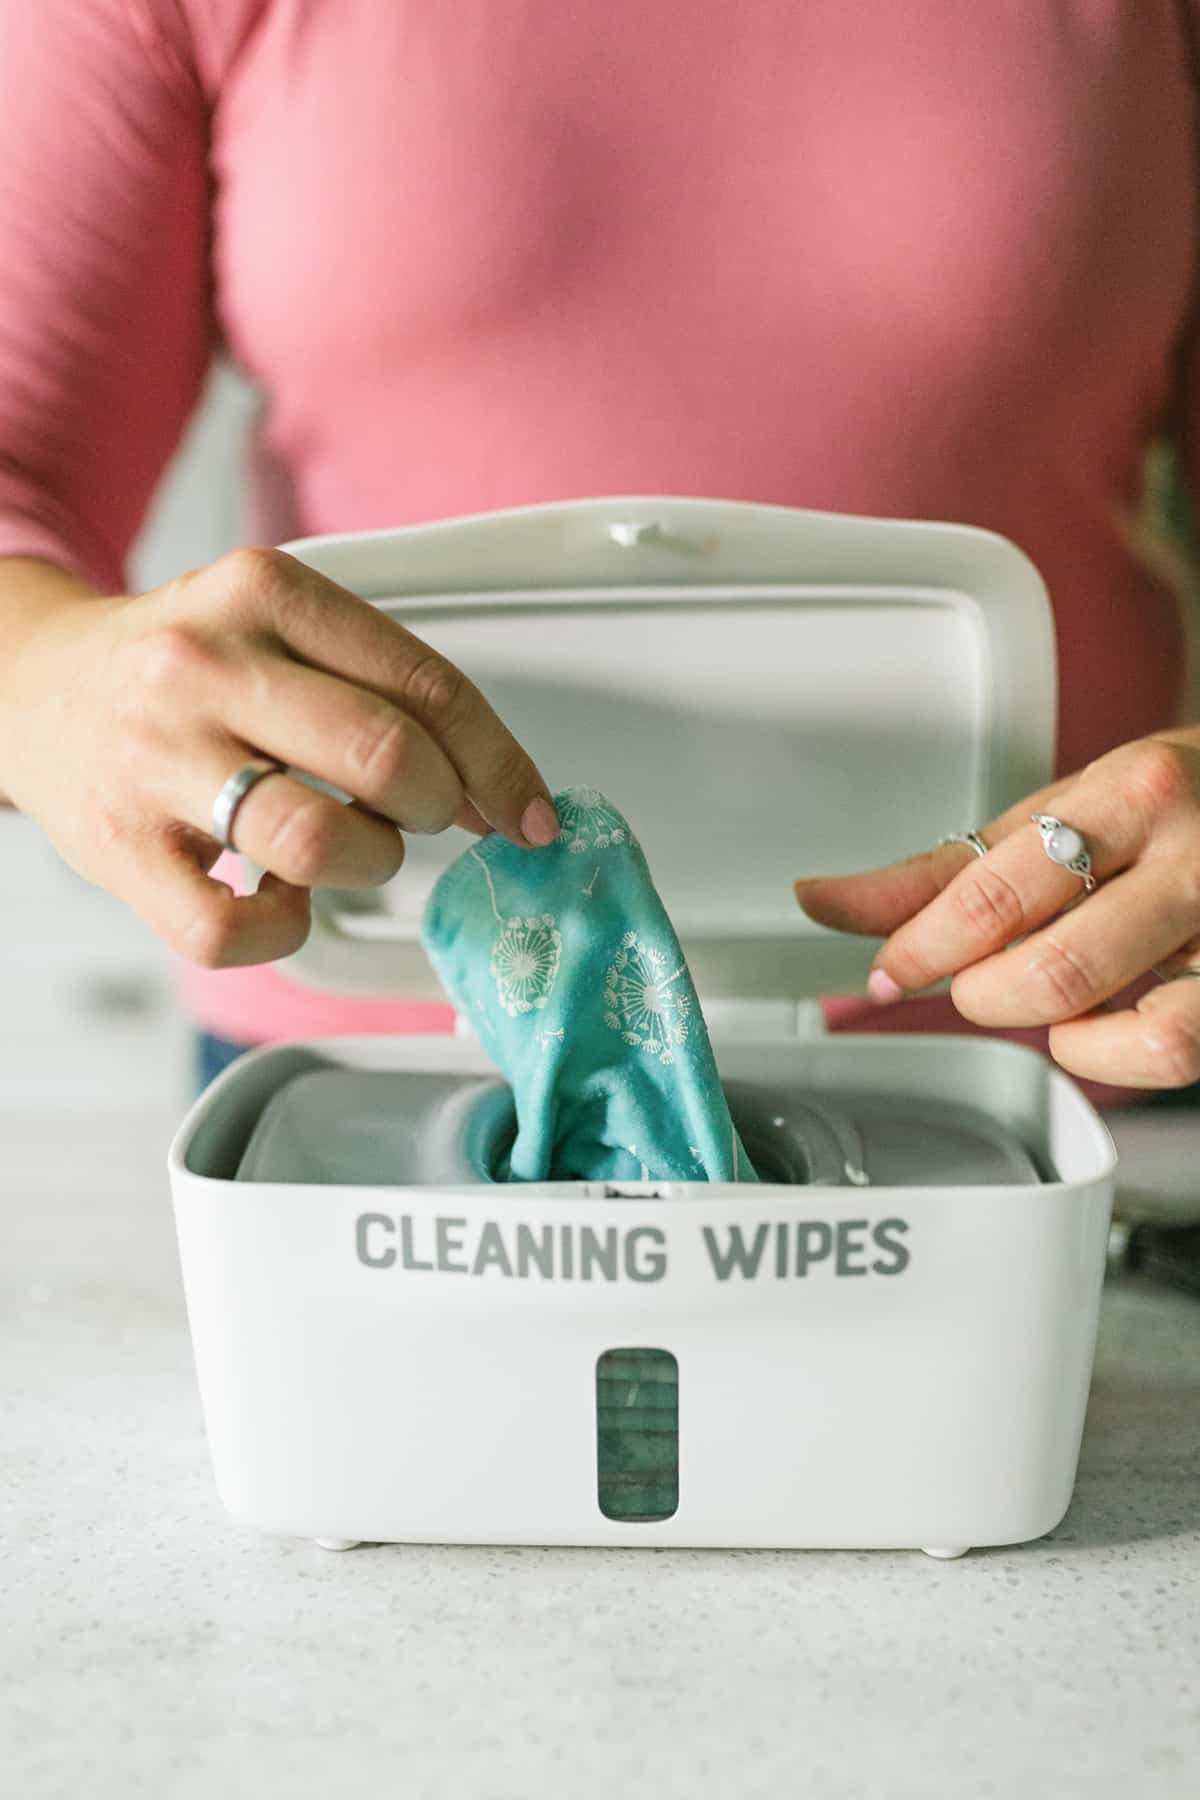 Woman's hands pulling DIY Disinfecting Wipes out of a dispenser.